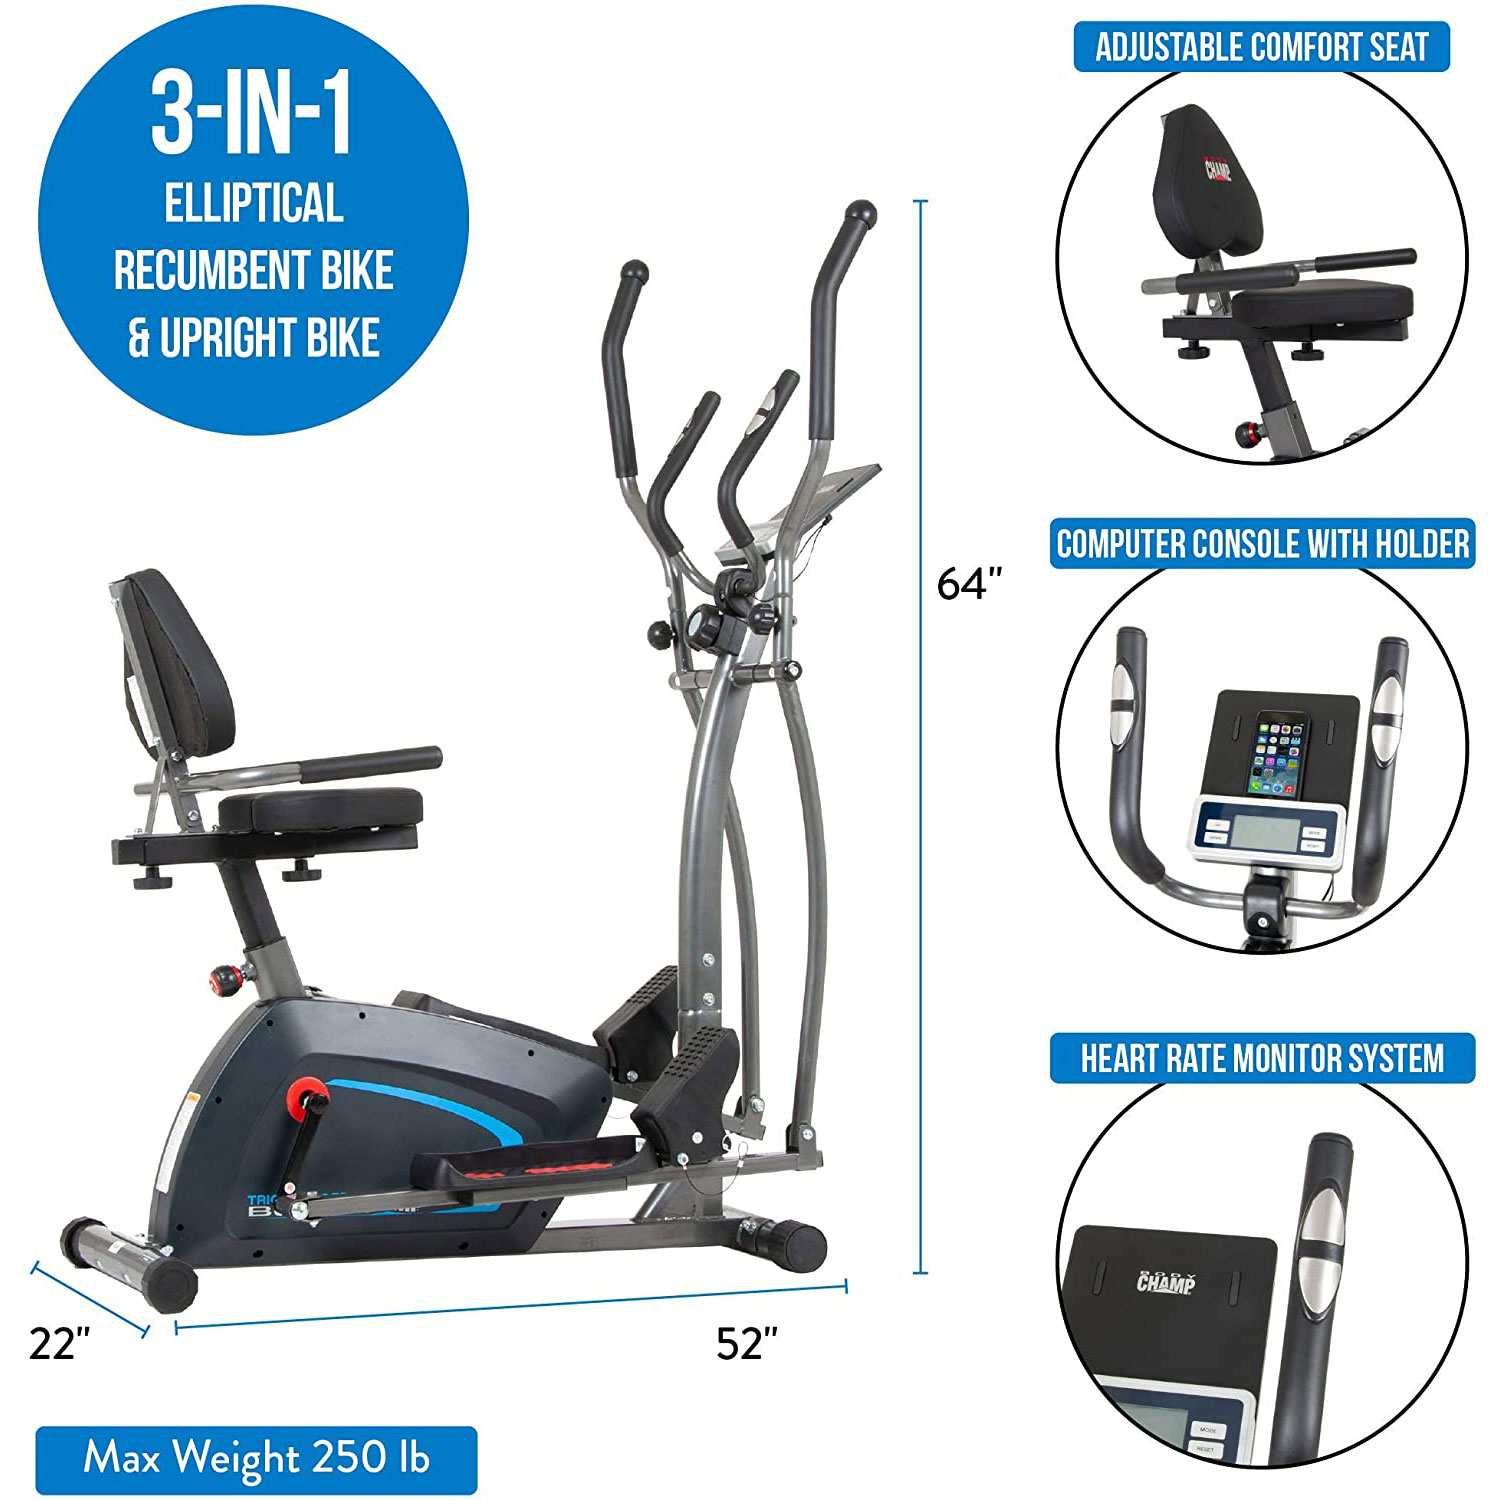 Body Champ BRT1875 3-in-1 Elliptical Trainer, Magnetic Resistance, Heart Rate, Max. 250 lbs - image 3 of 7